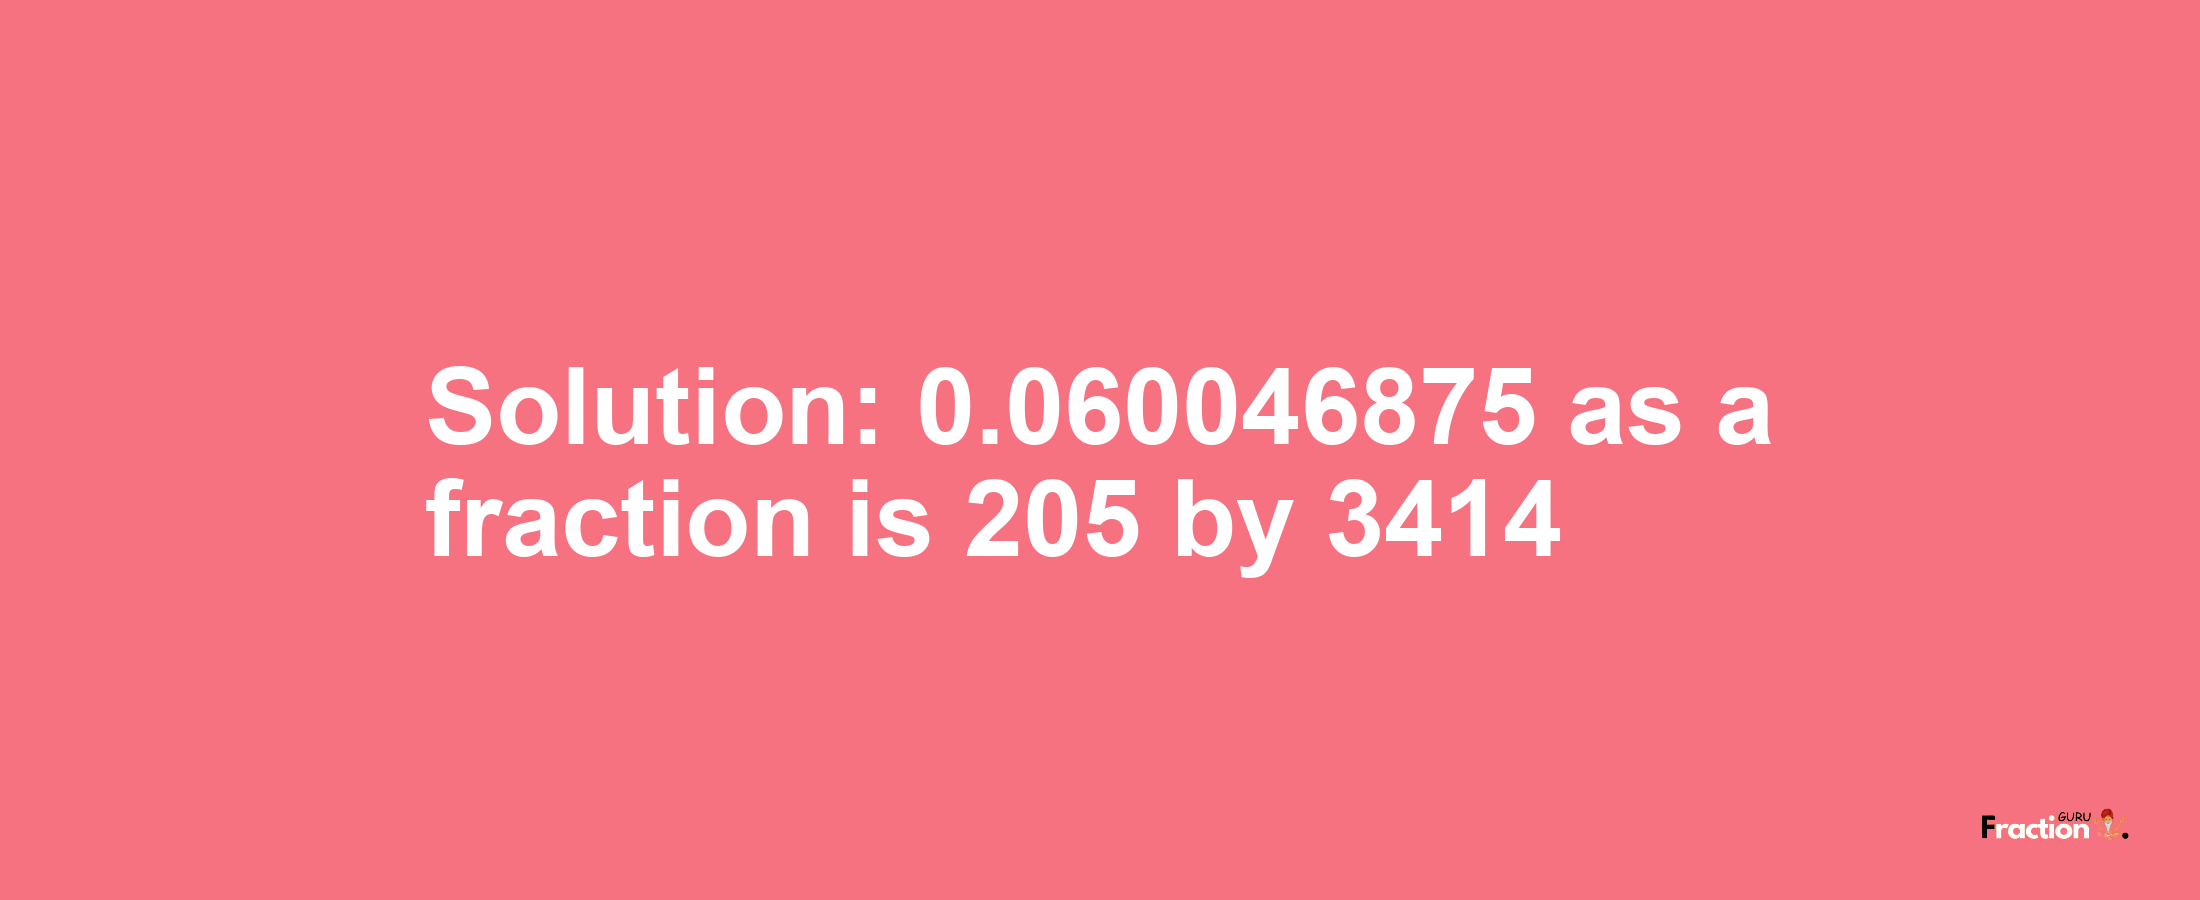 Solution:0.060046875 as a fraction is 205/3414